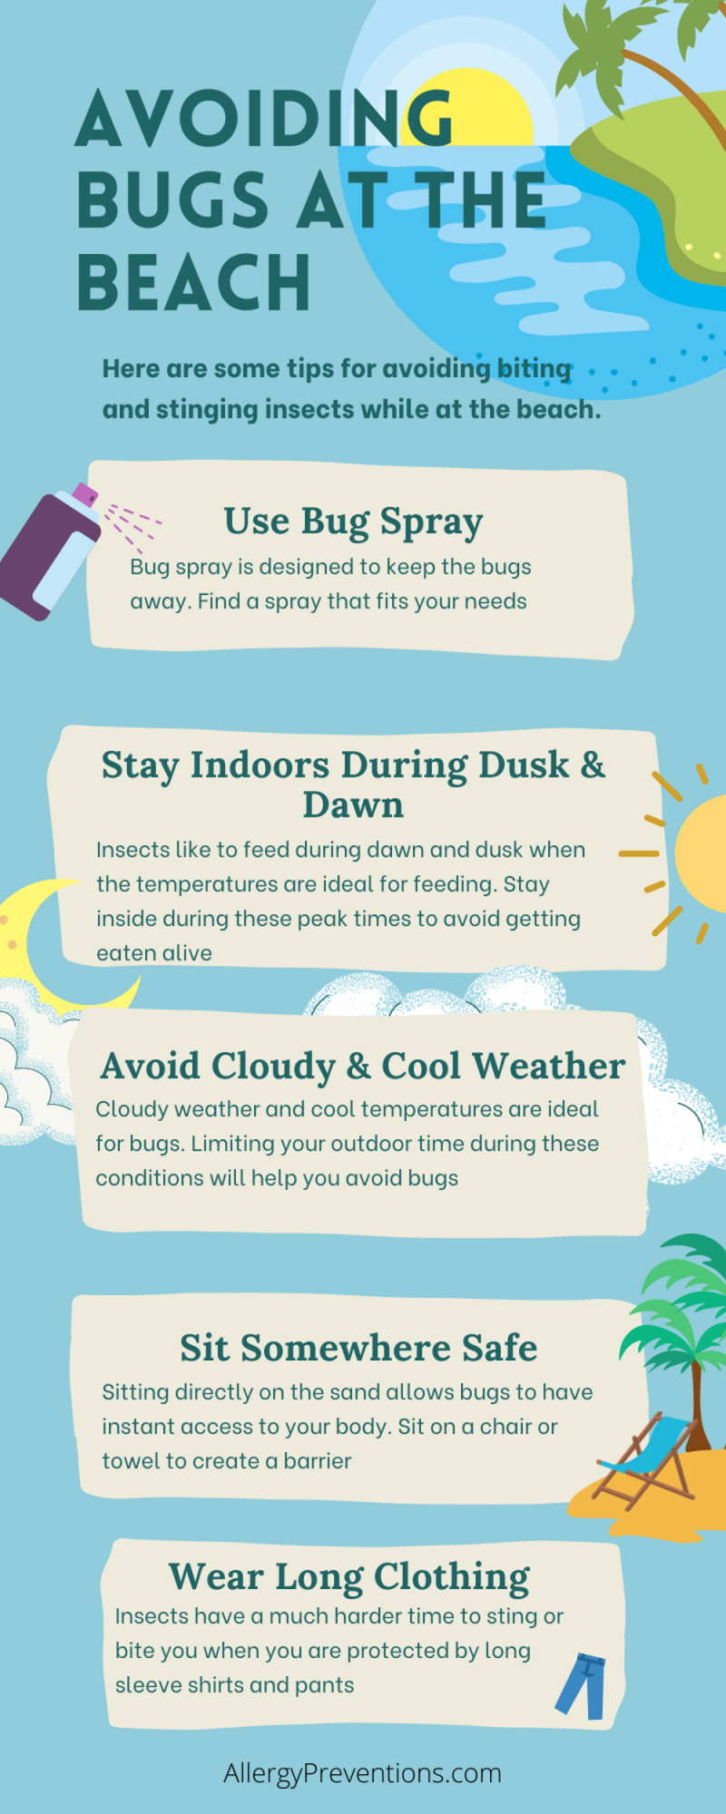 avoid insect bites at the beach infographic. 1. wear bug spray. 2. Stay indoors during dawn and dusk 3. Avoid cloudy and cold weather 4. Sit somewhere safe 5. wear long clothing 